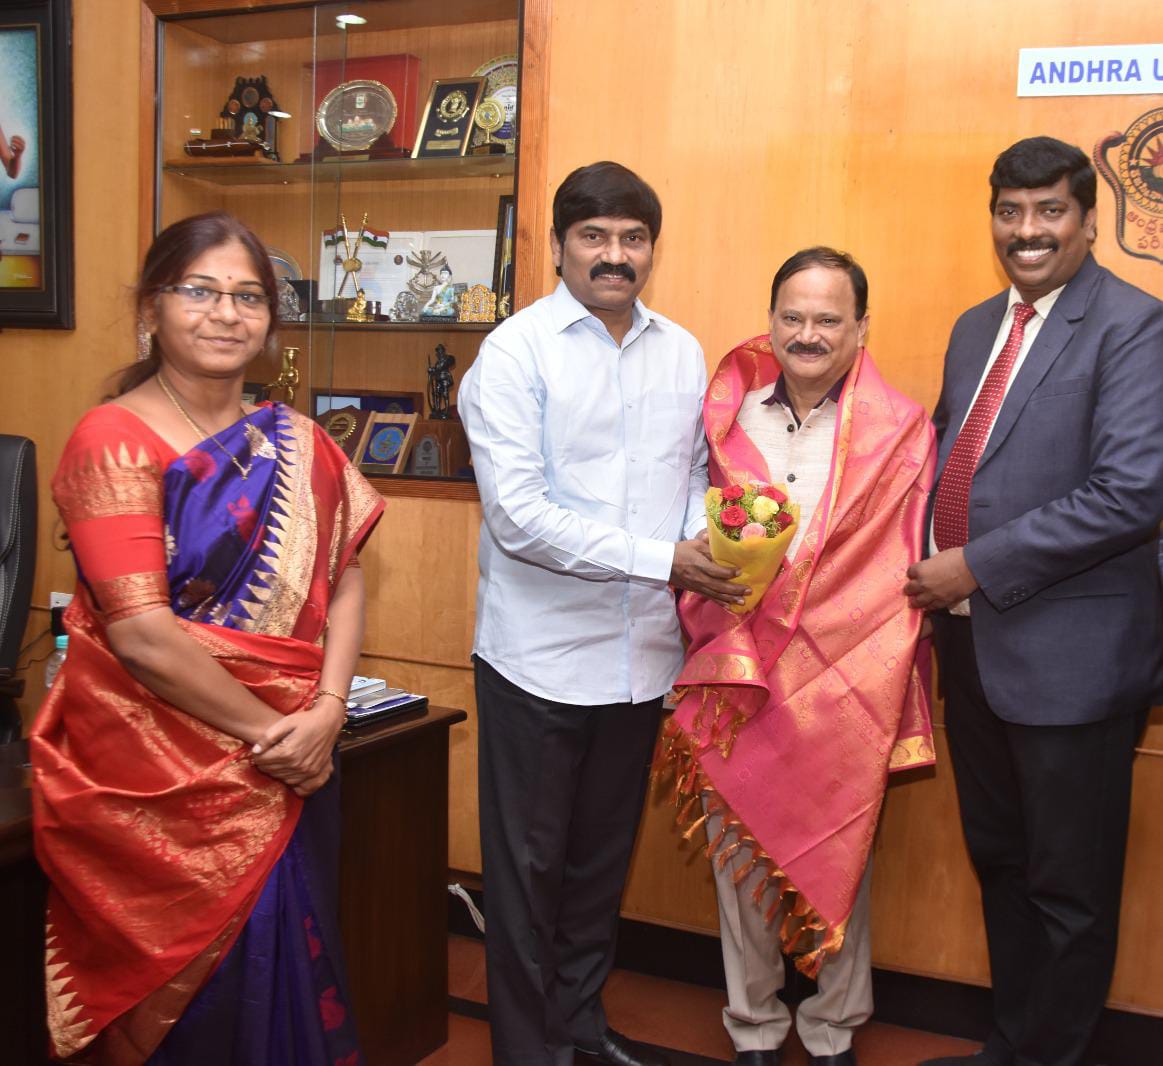 MoU between NCMRWF and Andhra University signed to enhance for fruitful collaboration in academic and research activities. On this occassion, Dr. V. S. Prasad, Head NCMRWF visited Andhra University and was honoured. He also interacted with the university adminstration.